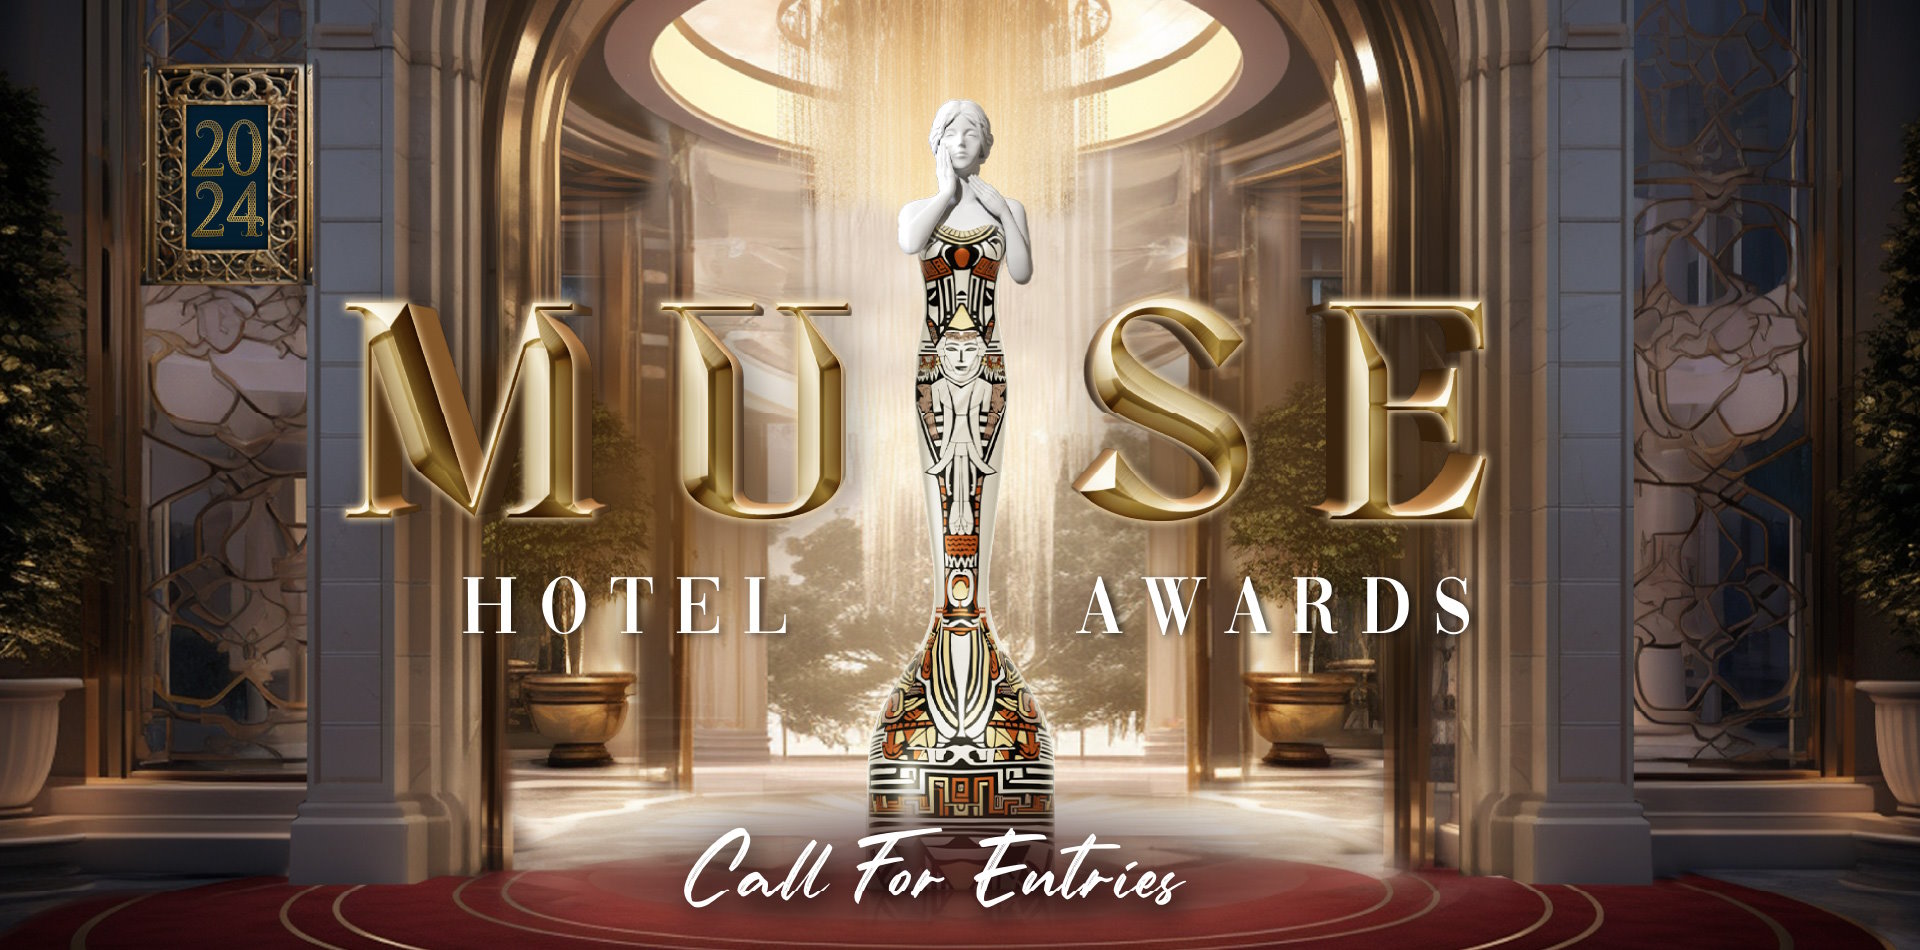 MUSE Hotel Awards 2024 Call For Entries